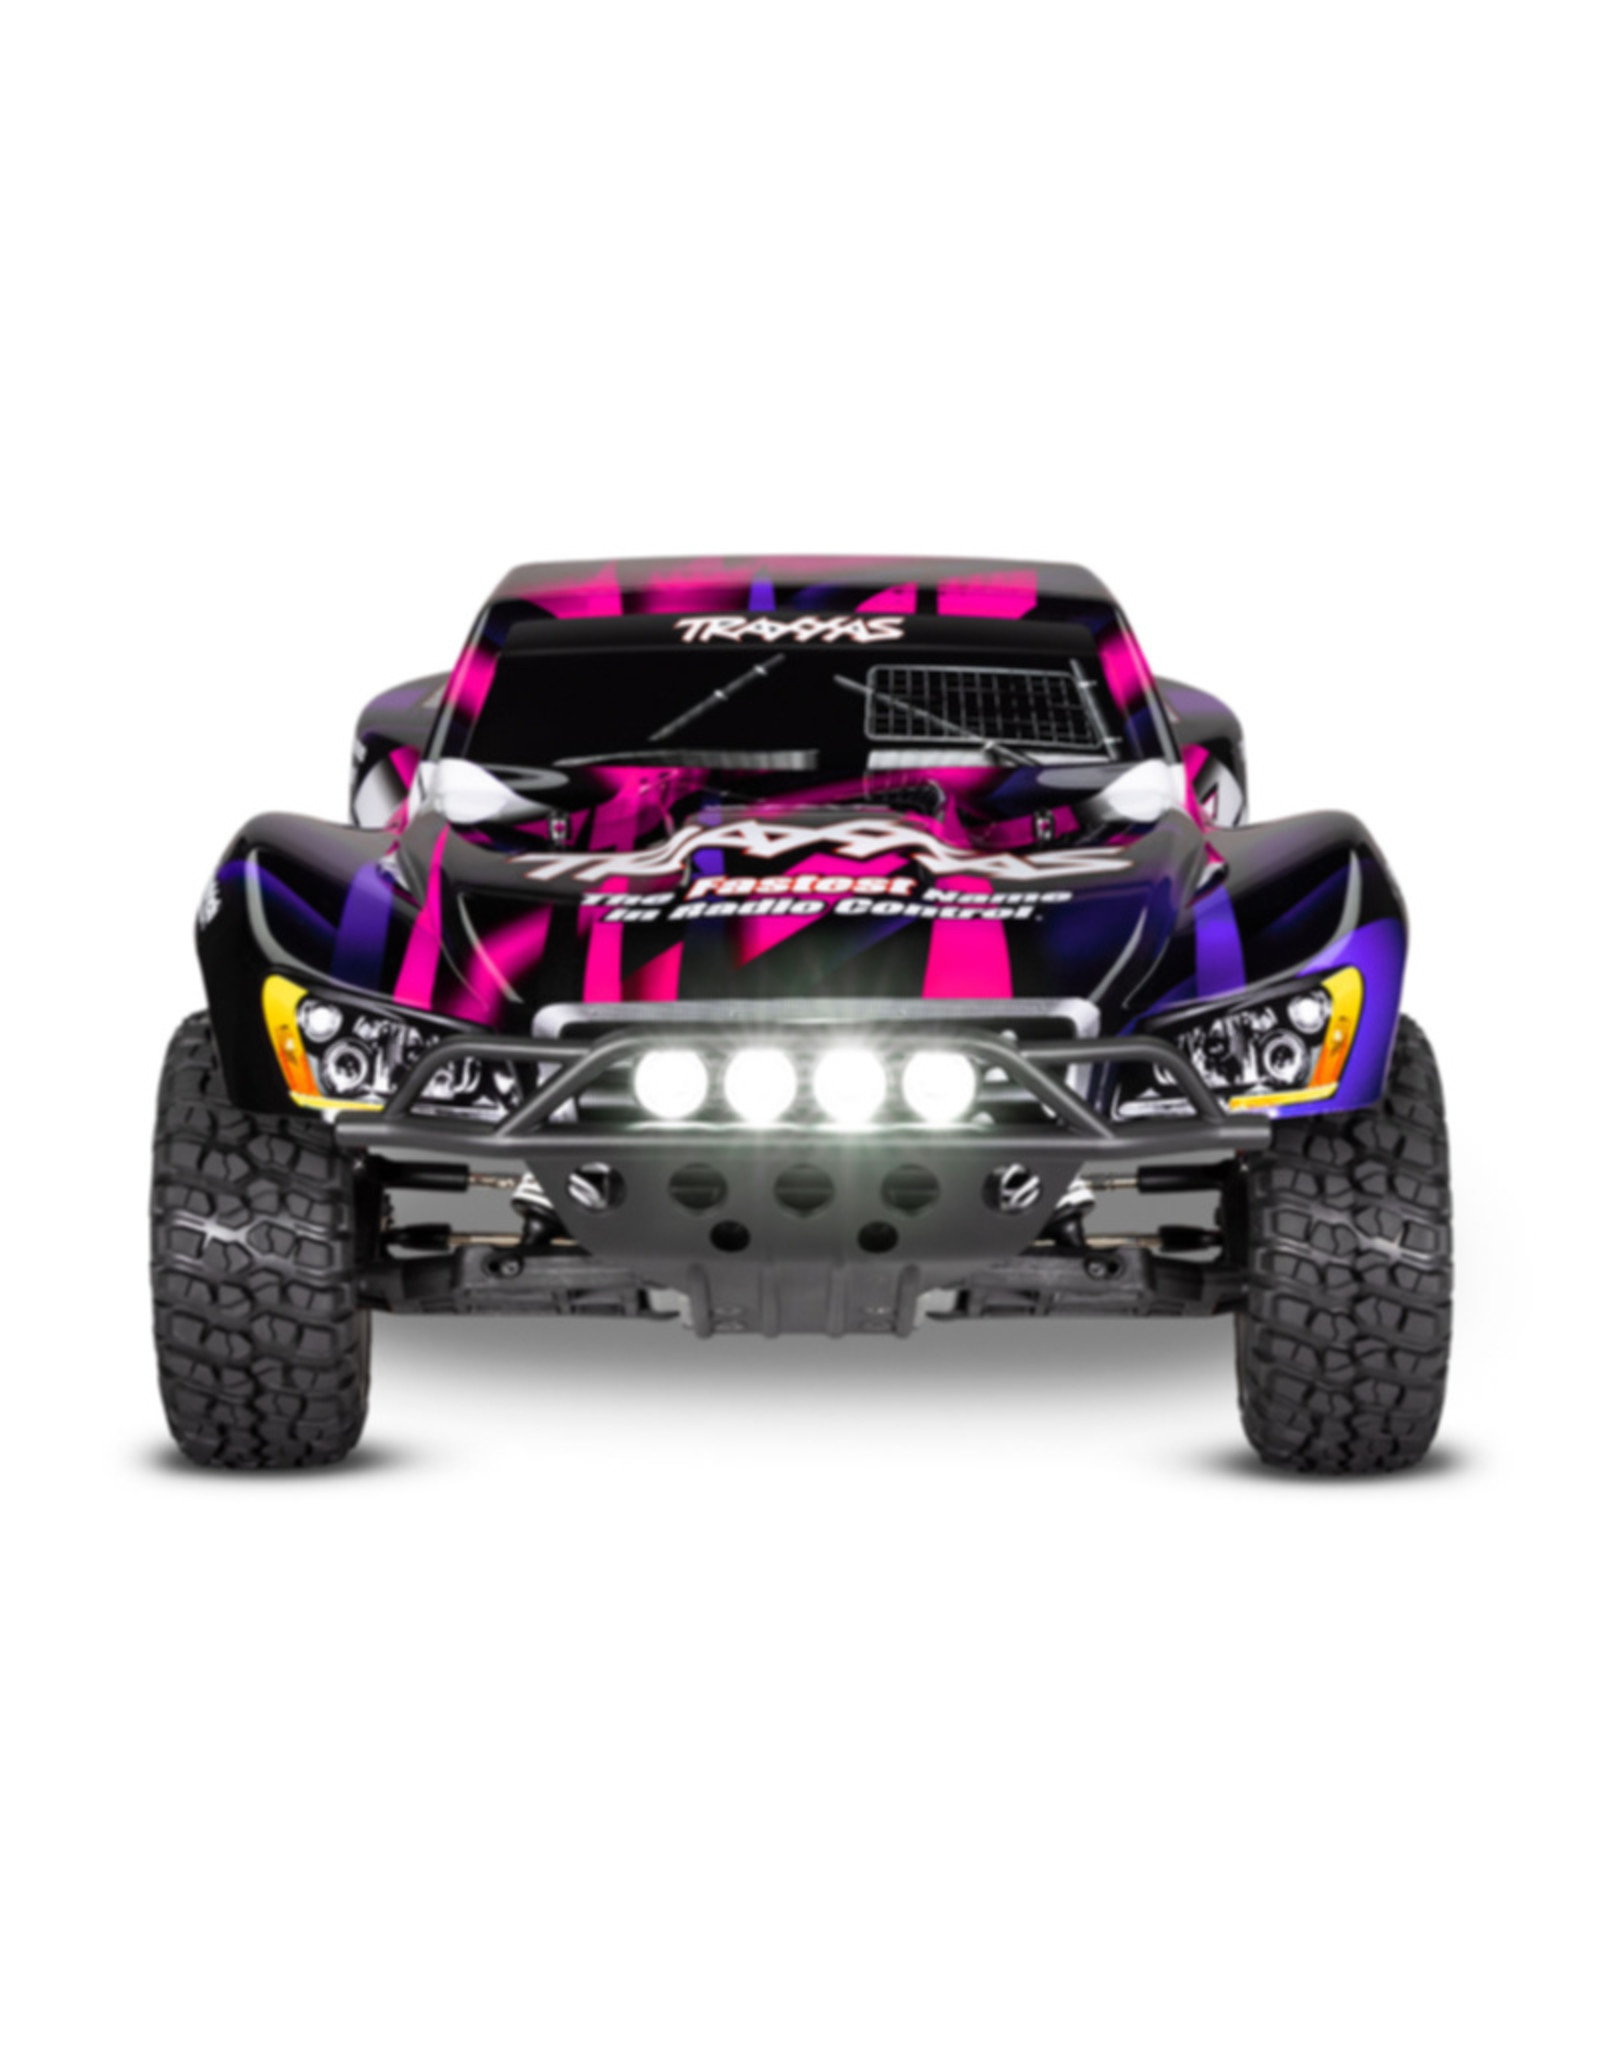 Traxxas TRA58034-61  SLASH 2WD WITH LED LIGHTS  PINK